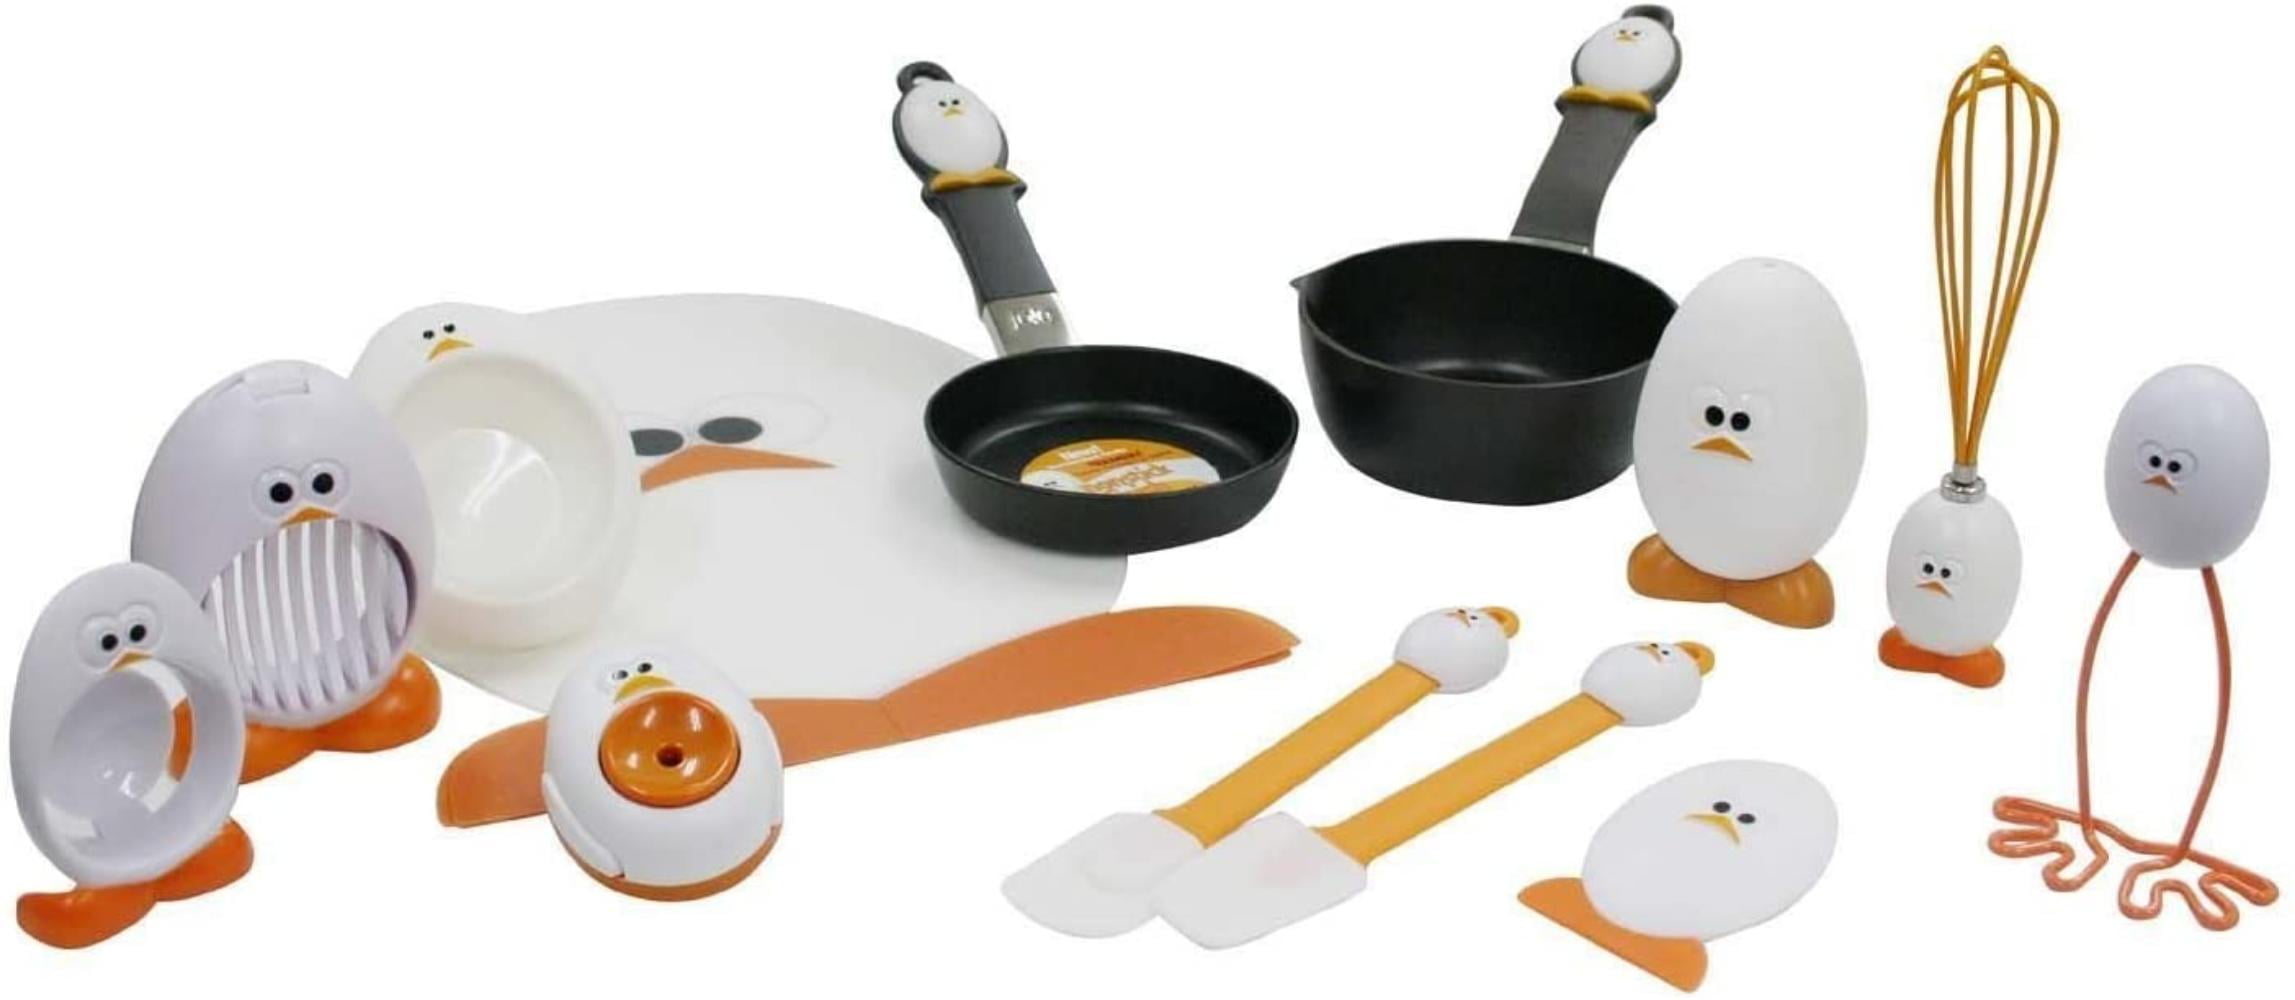 Joie 4.5 Inch Mini Nonstick Egg and Fry Pan 